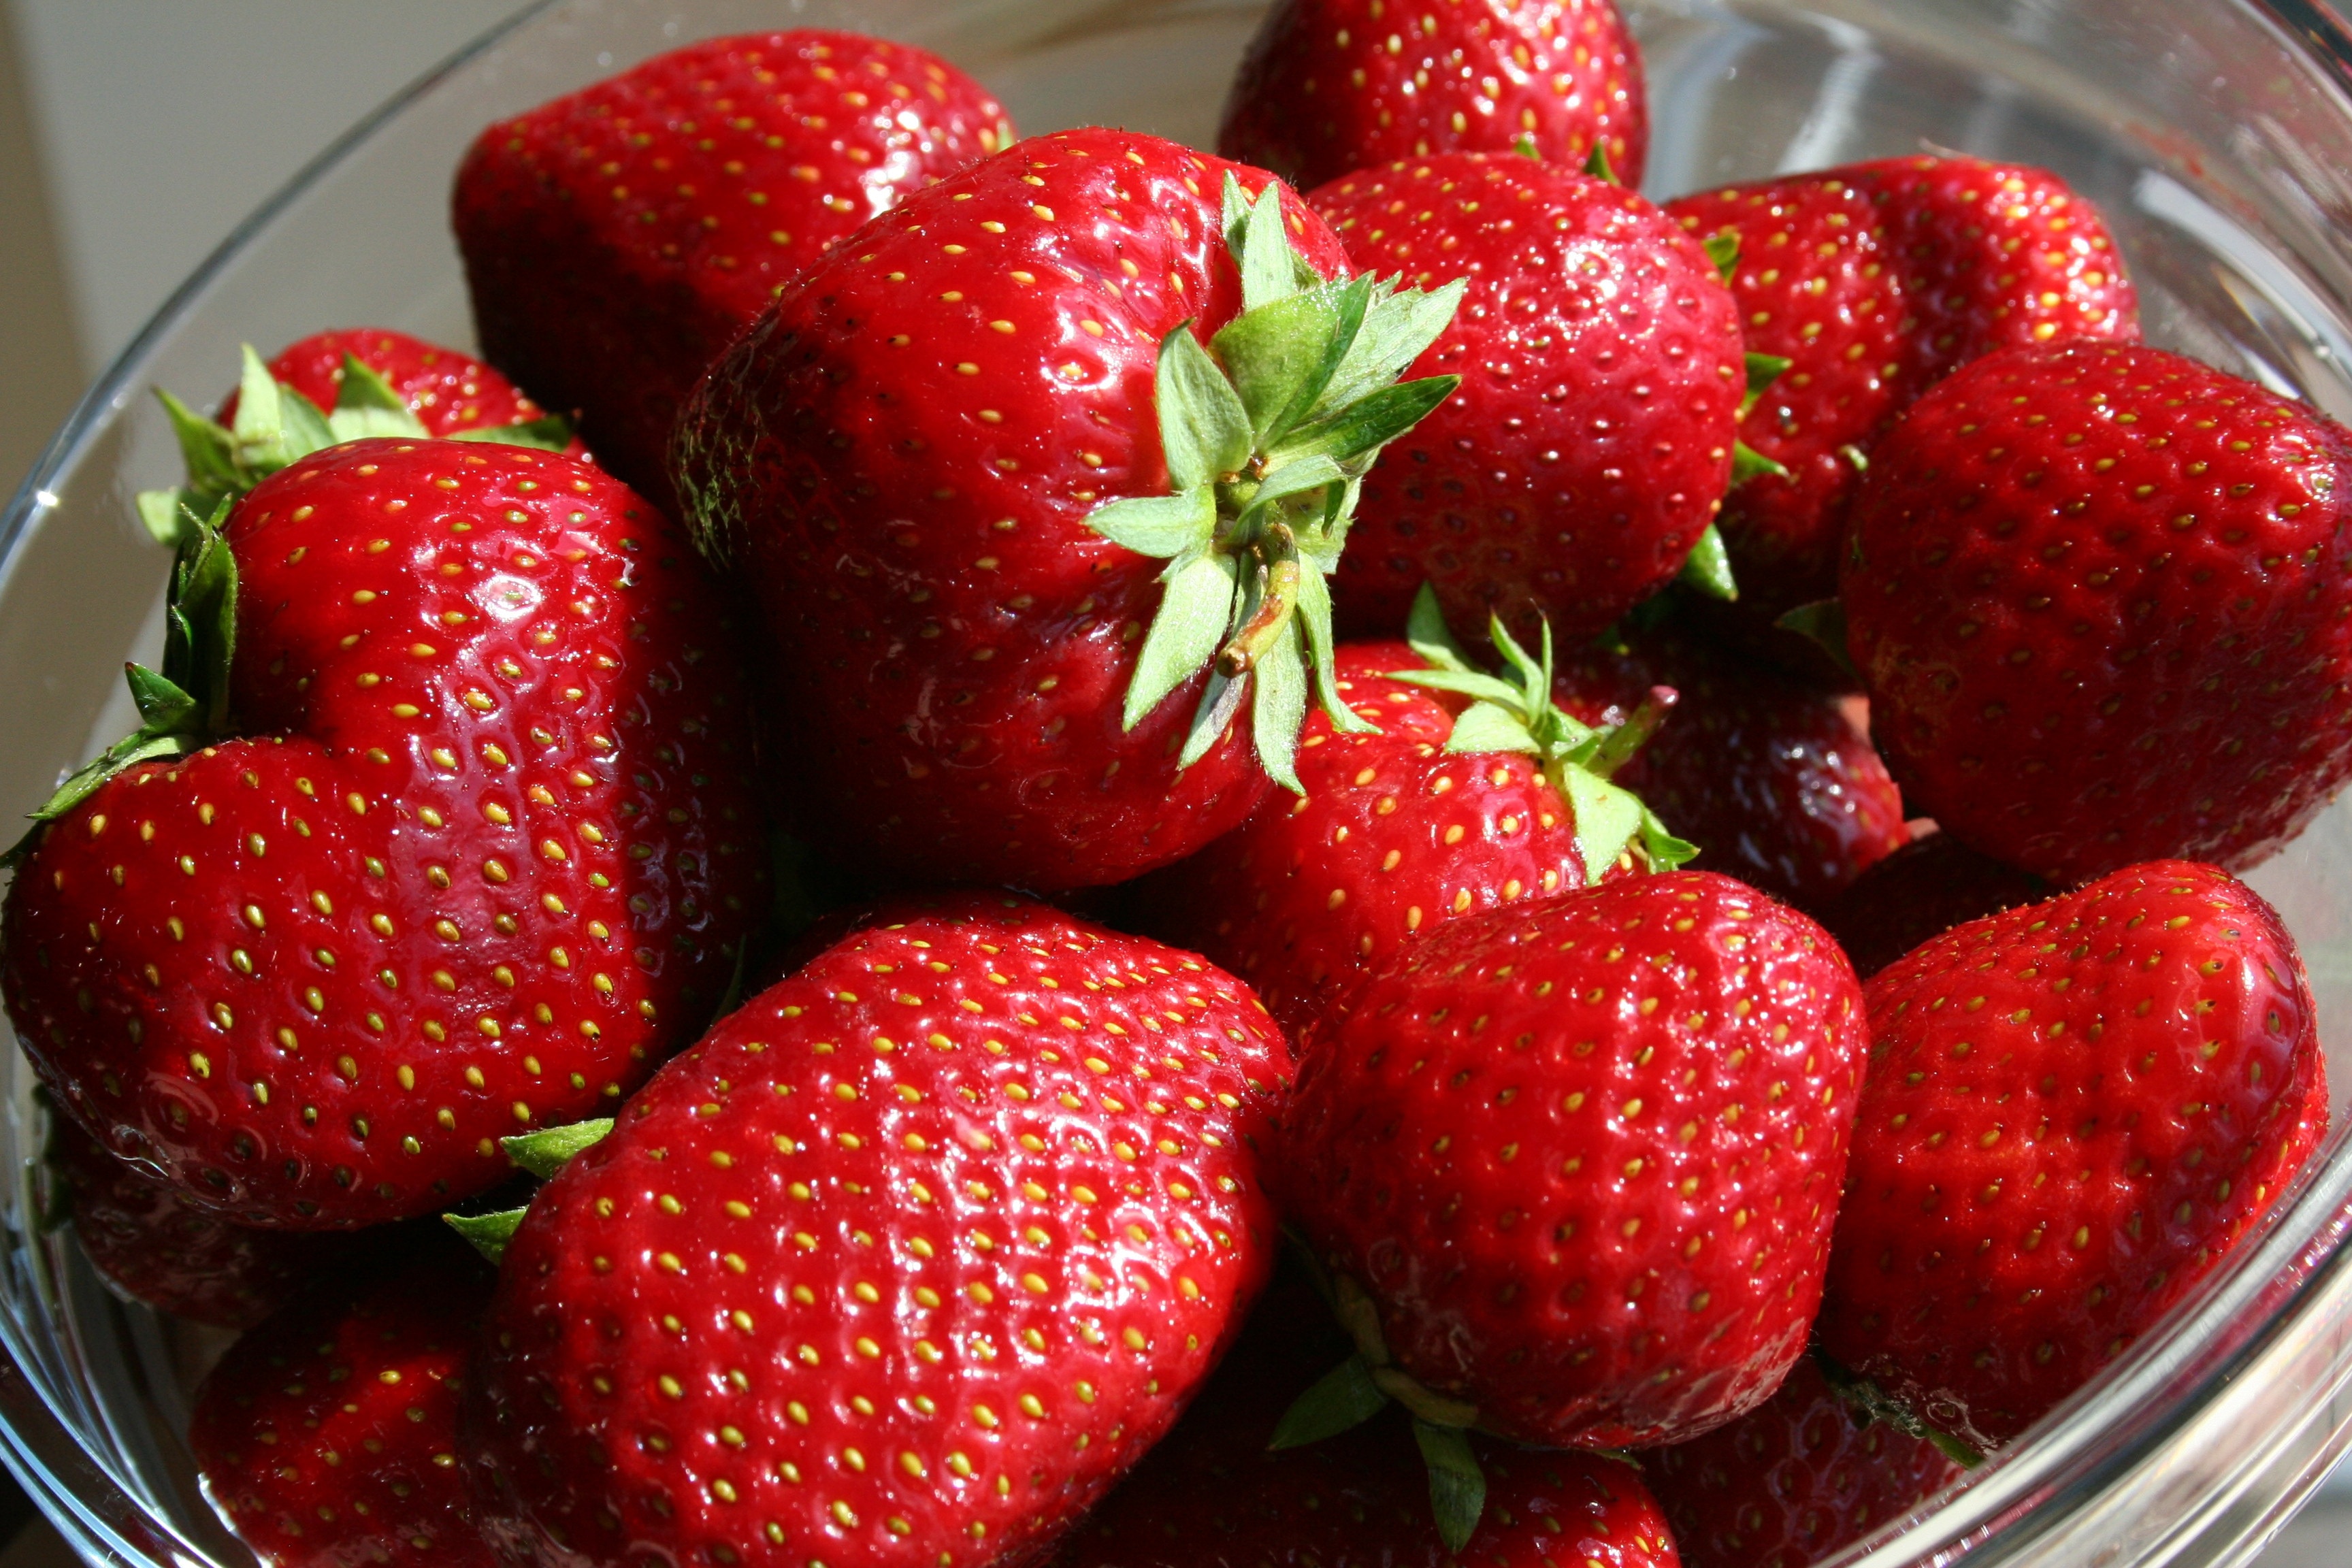 strawberries on clear glass bowl